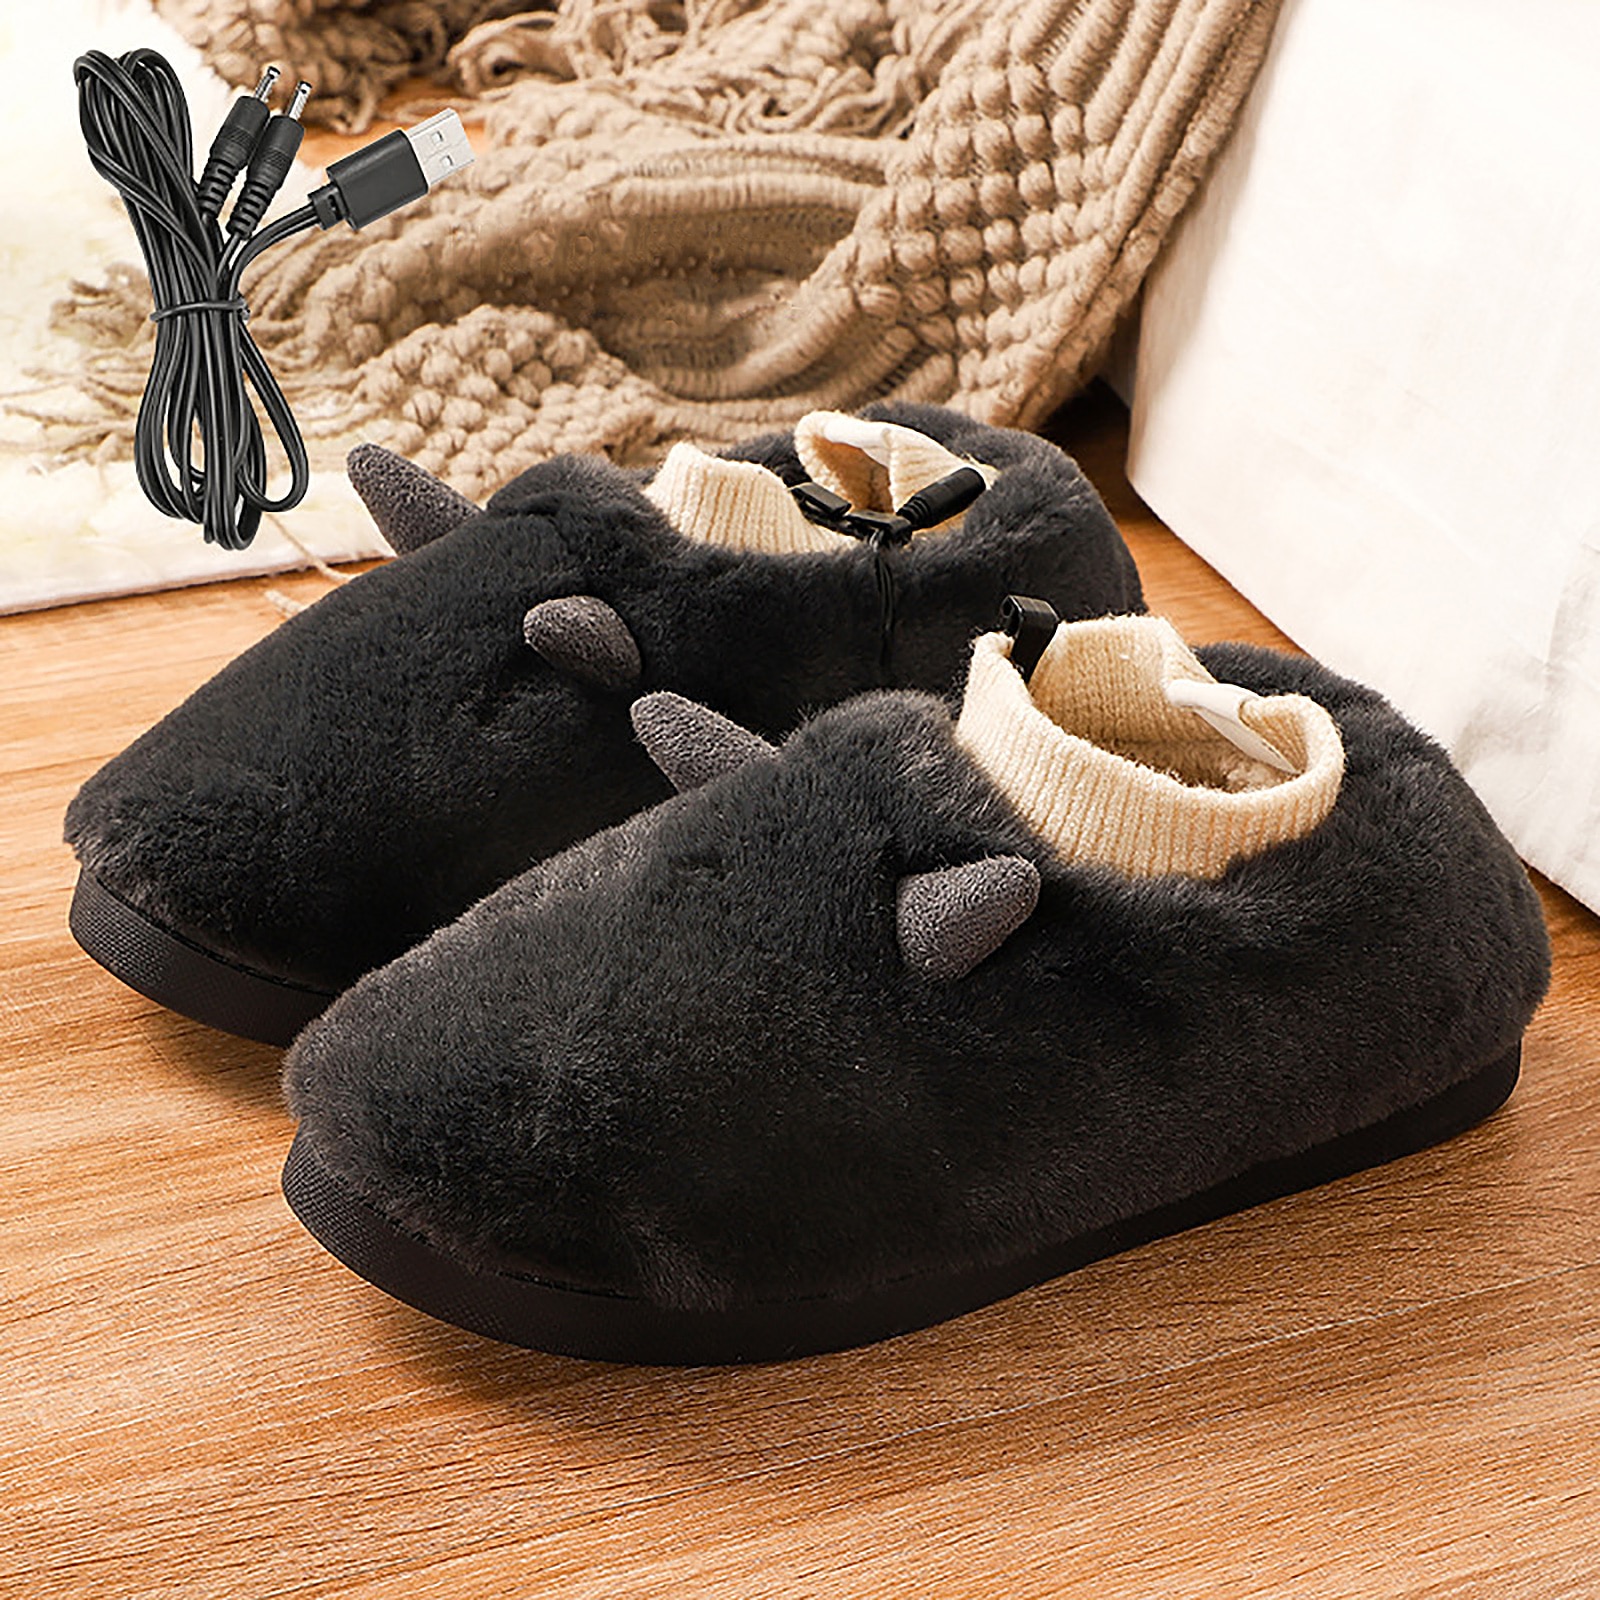 Heated Feet Warmer USB Foot Warmers Winter Shoes Plush Cute Removable And Washable Slippers